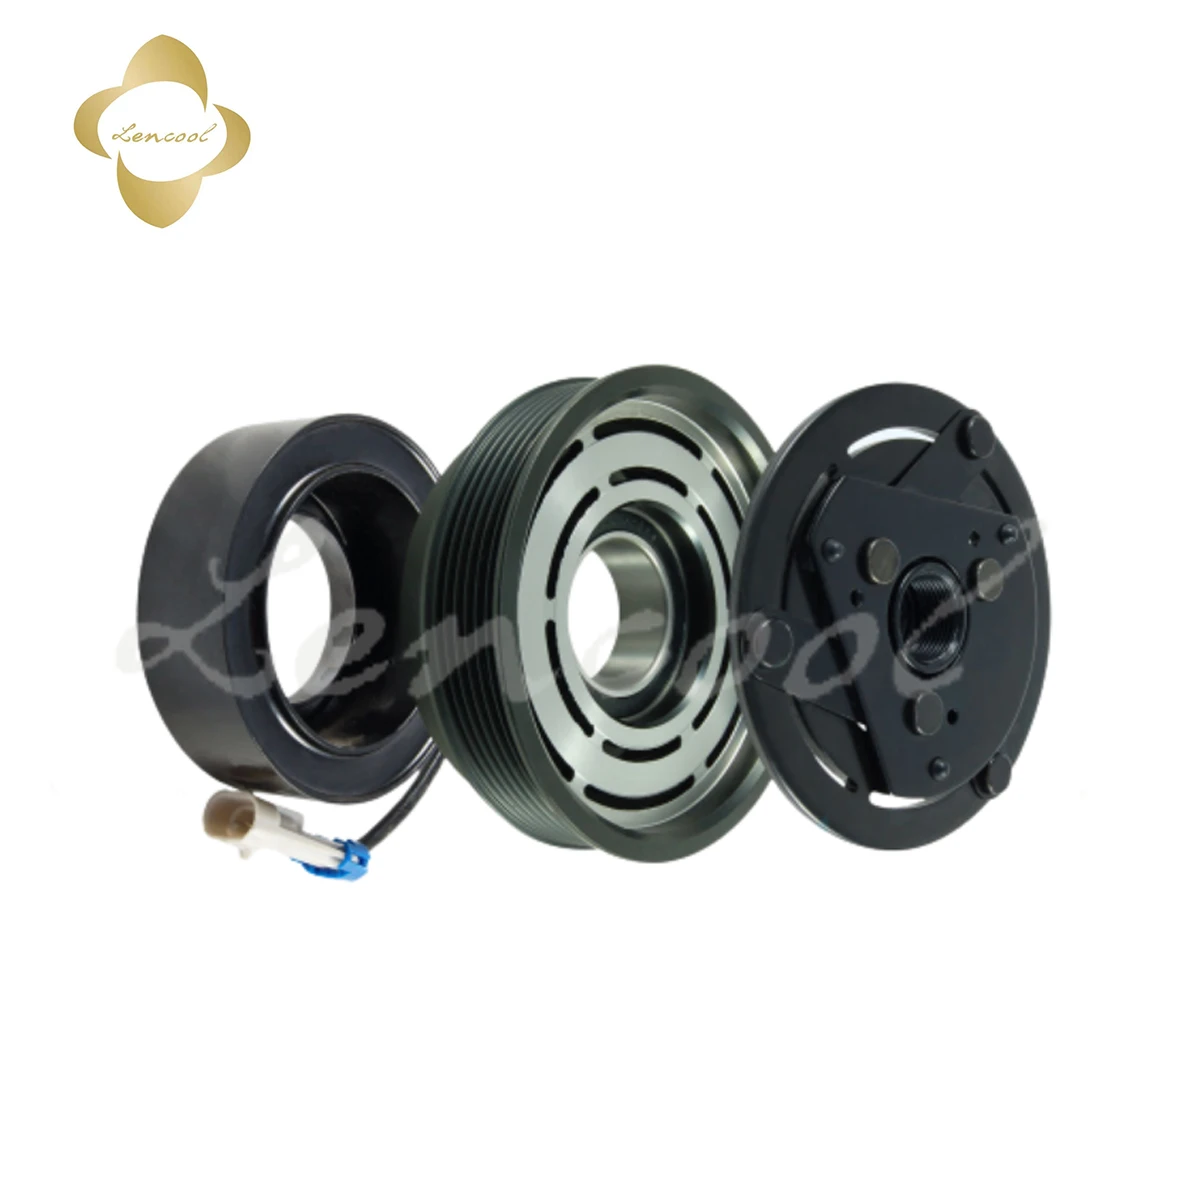 

AC A/C Air Conditioning Compressor Clutch Pulley FOR BUICK CHEVROLET HOLDEN OPEL SAAB VAUXHALL 1135025 1135295 1135323 1854032